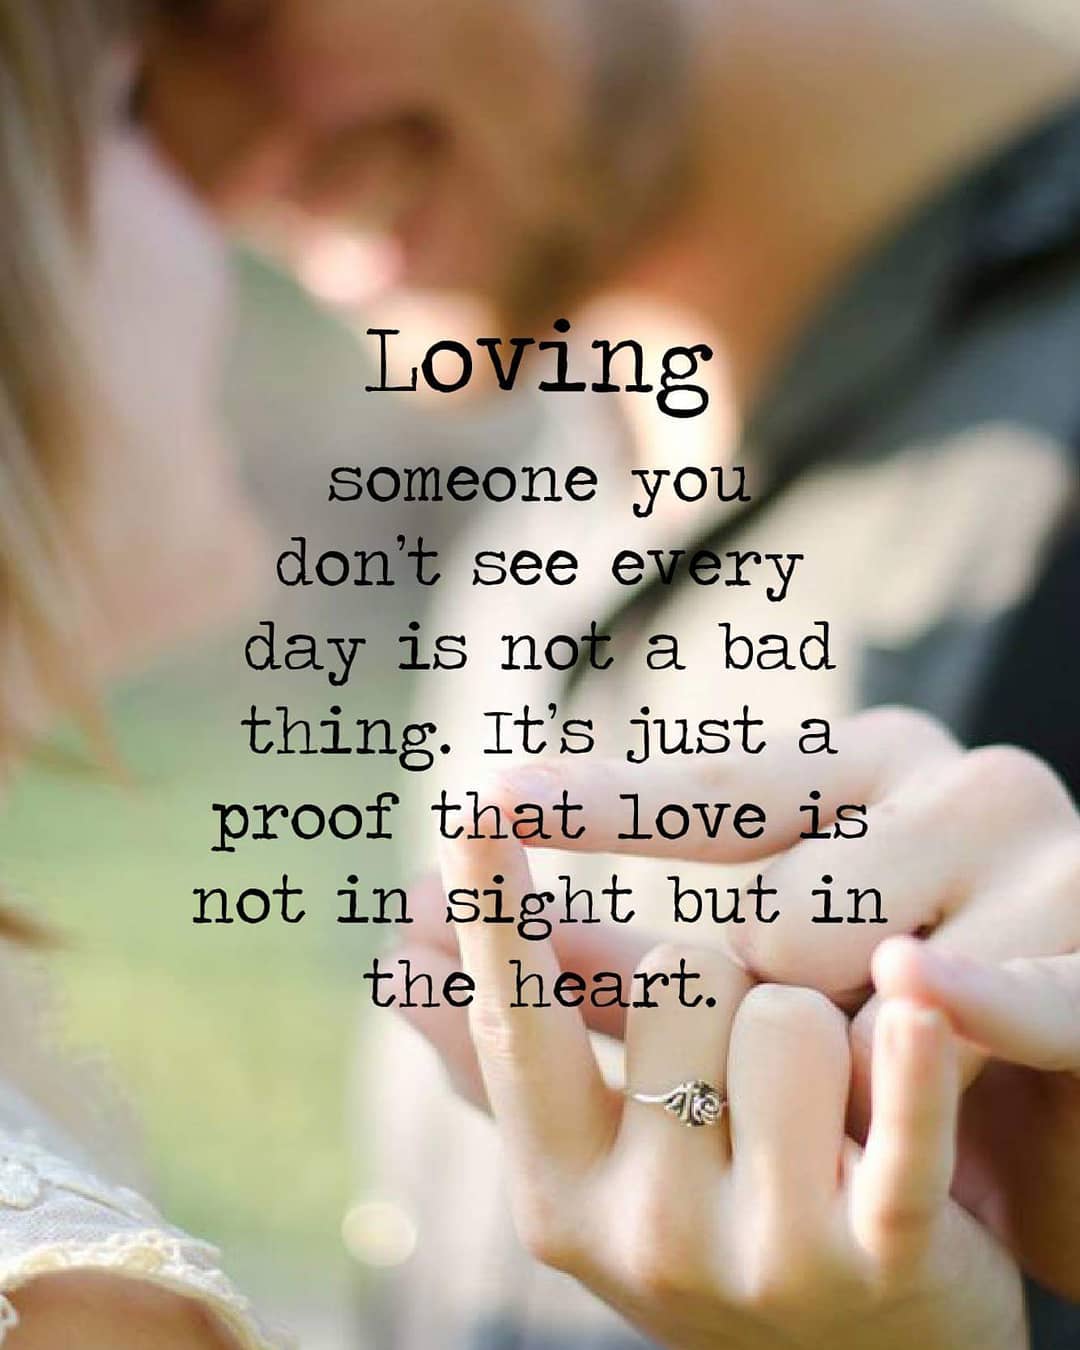 Albums 97+ Images images of love quotes free download Superb